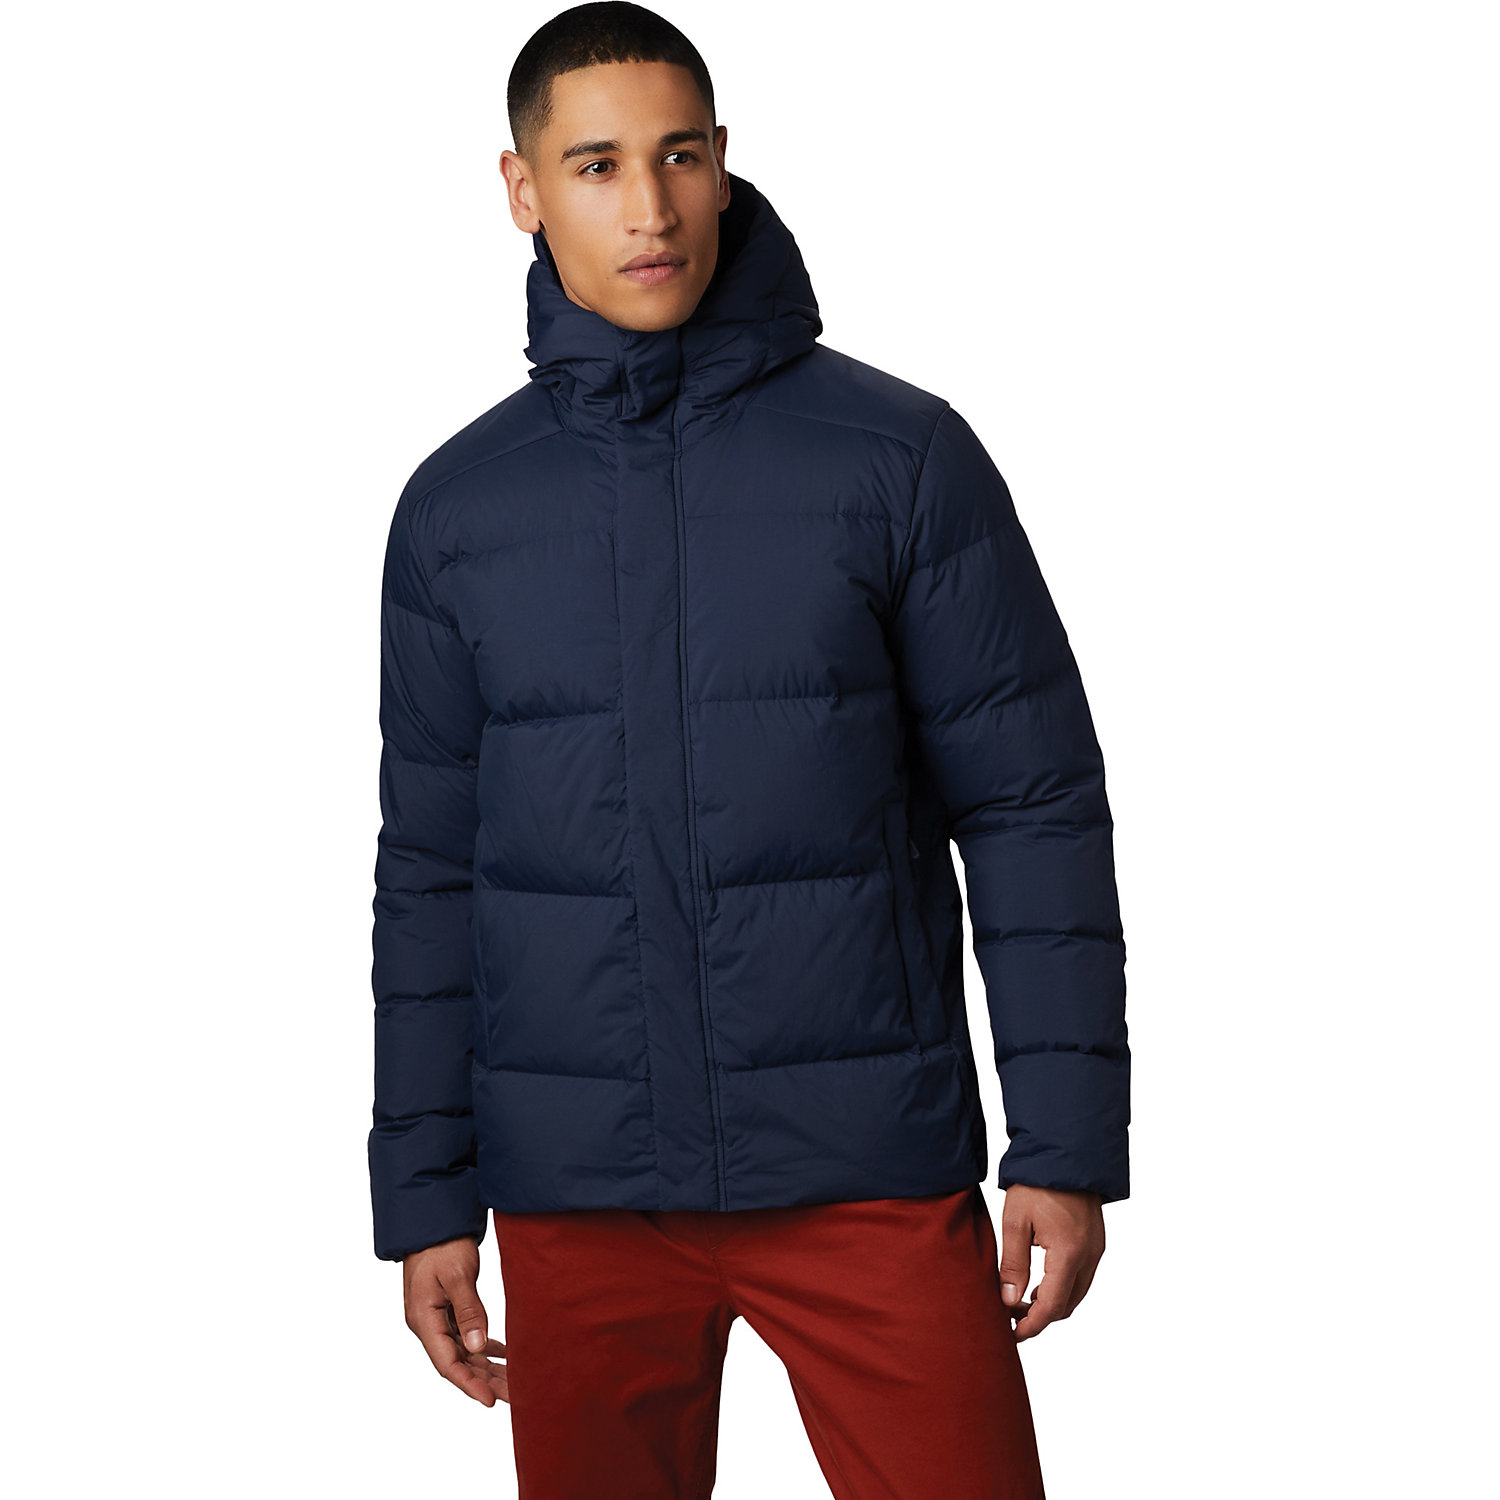 Black Professional Men's Glacial Insulated Puffer